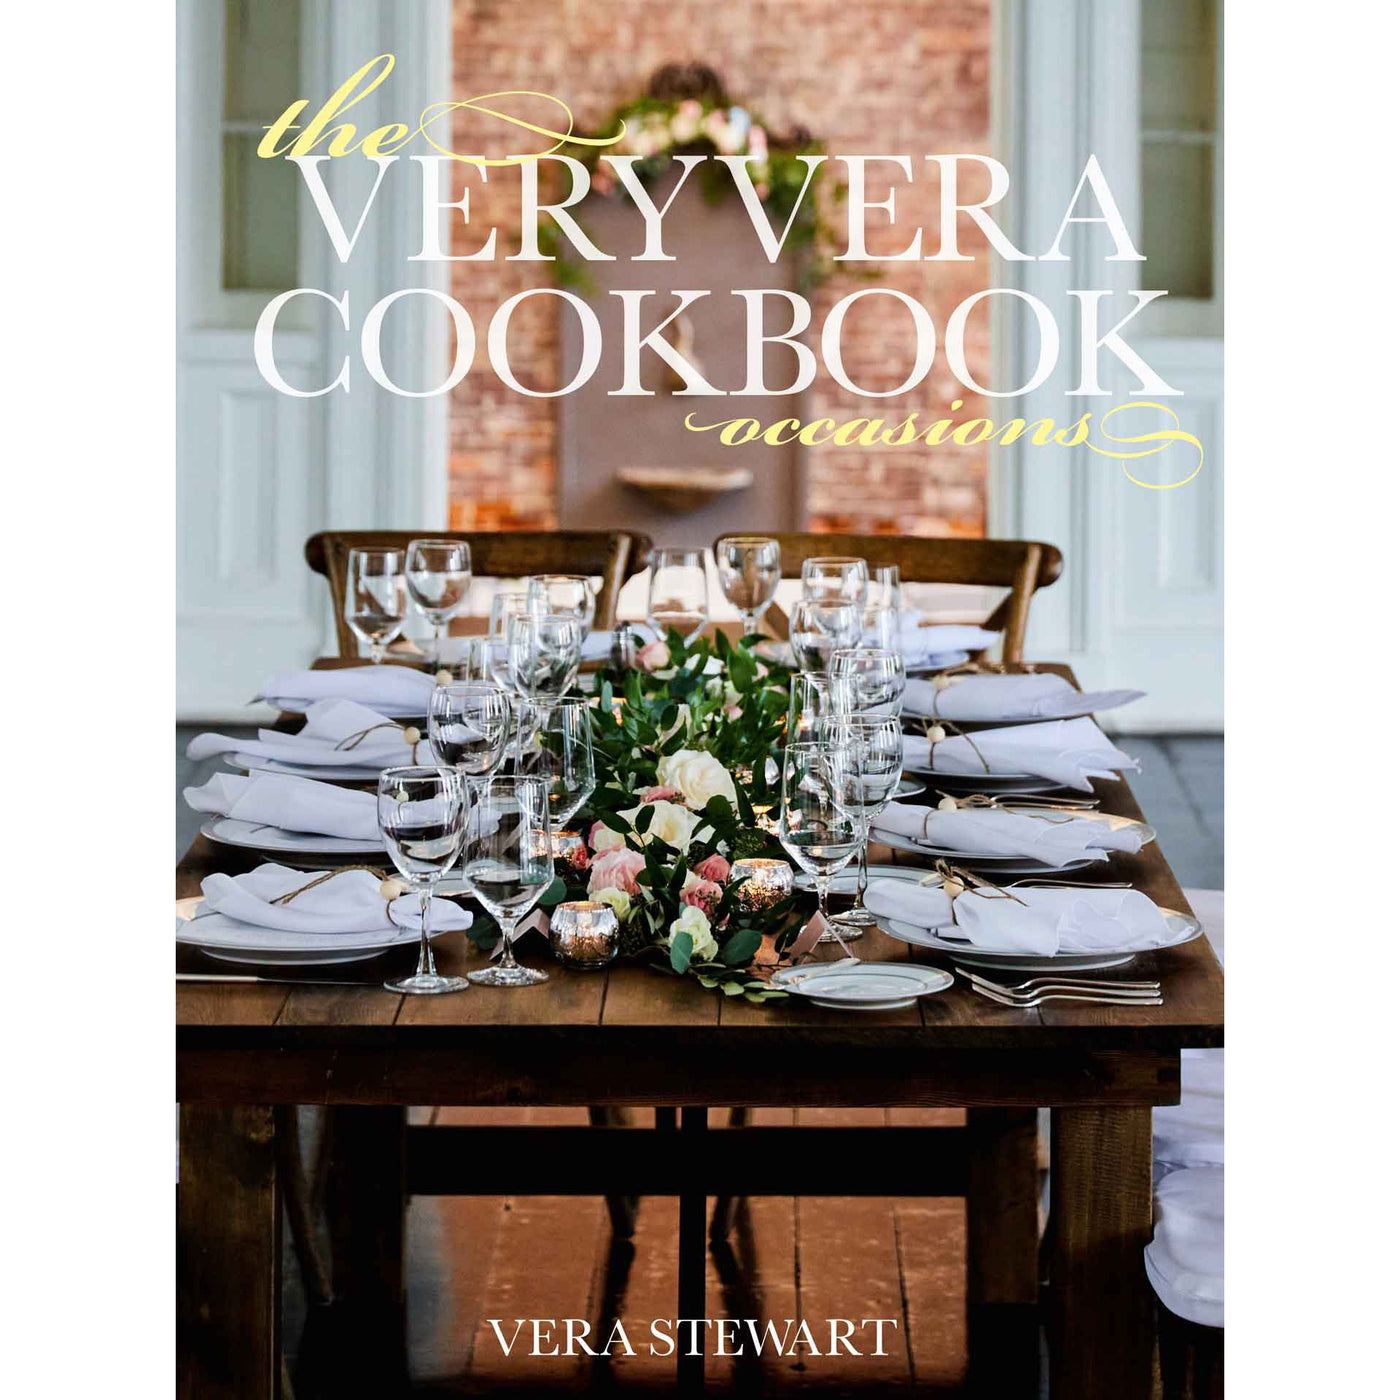 The Very Vera Cookbook Occasions-Media-Kevin's Fine Outdoor Gear & Apparel